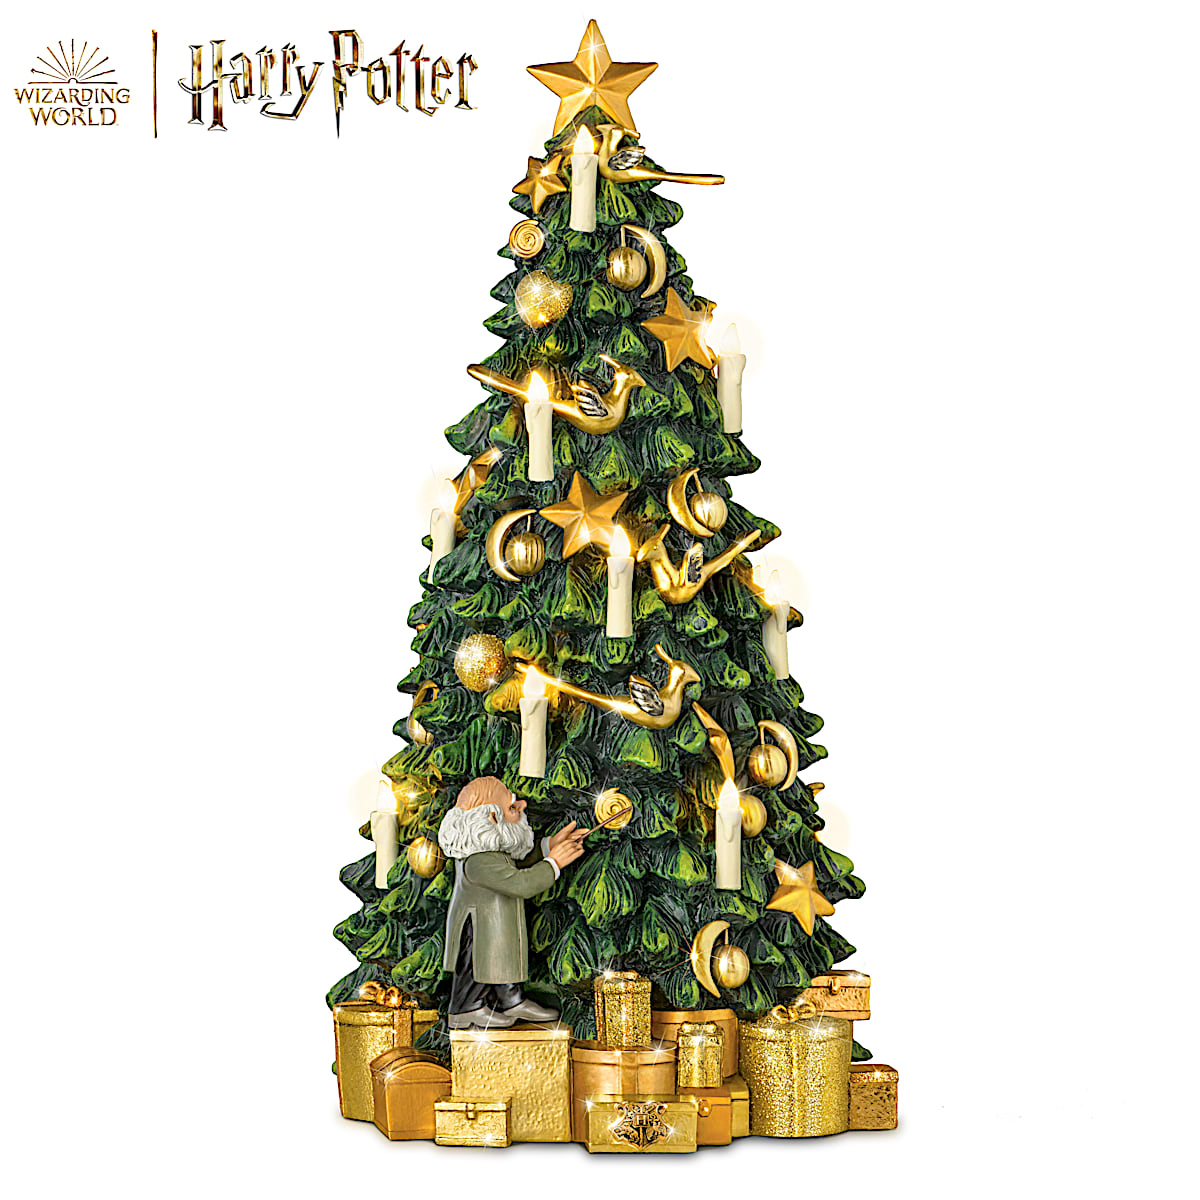 HARRY POTTER HOGWARTS Musical Tabletop Christmas Tree Featuring